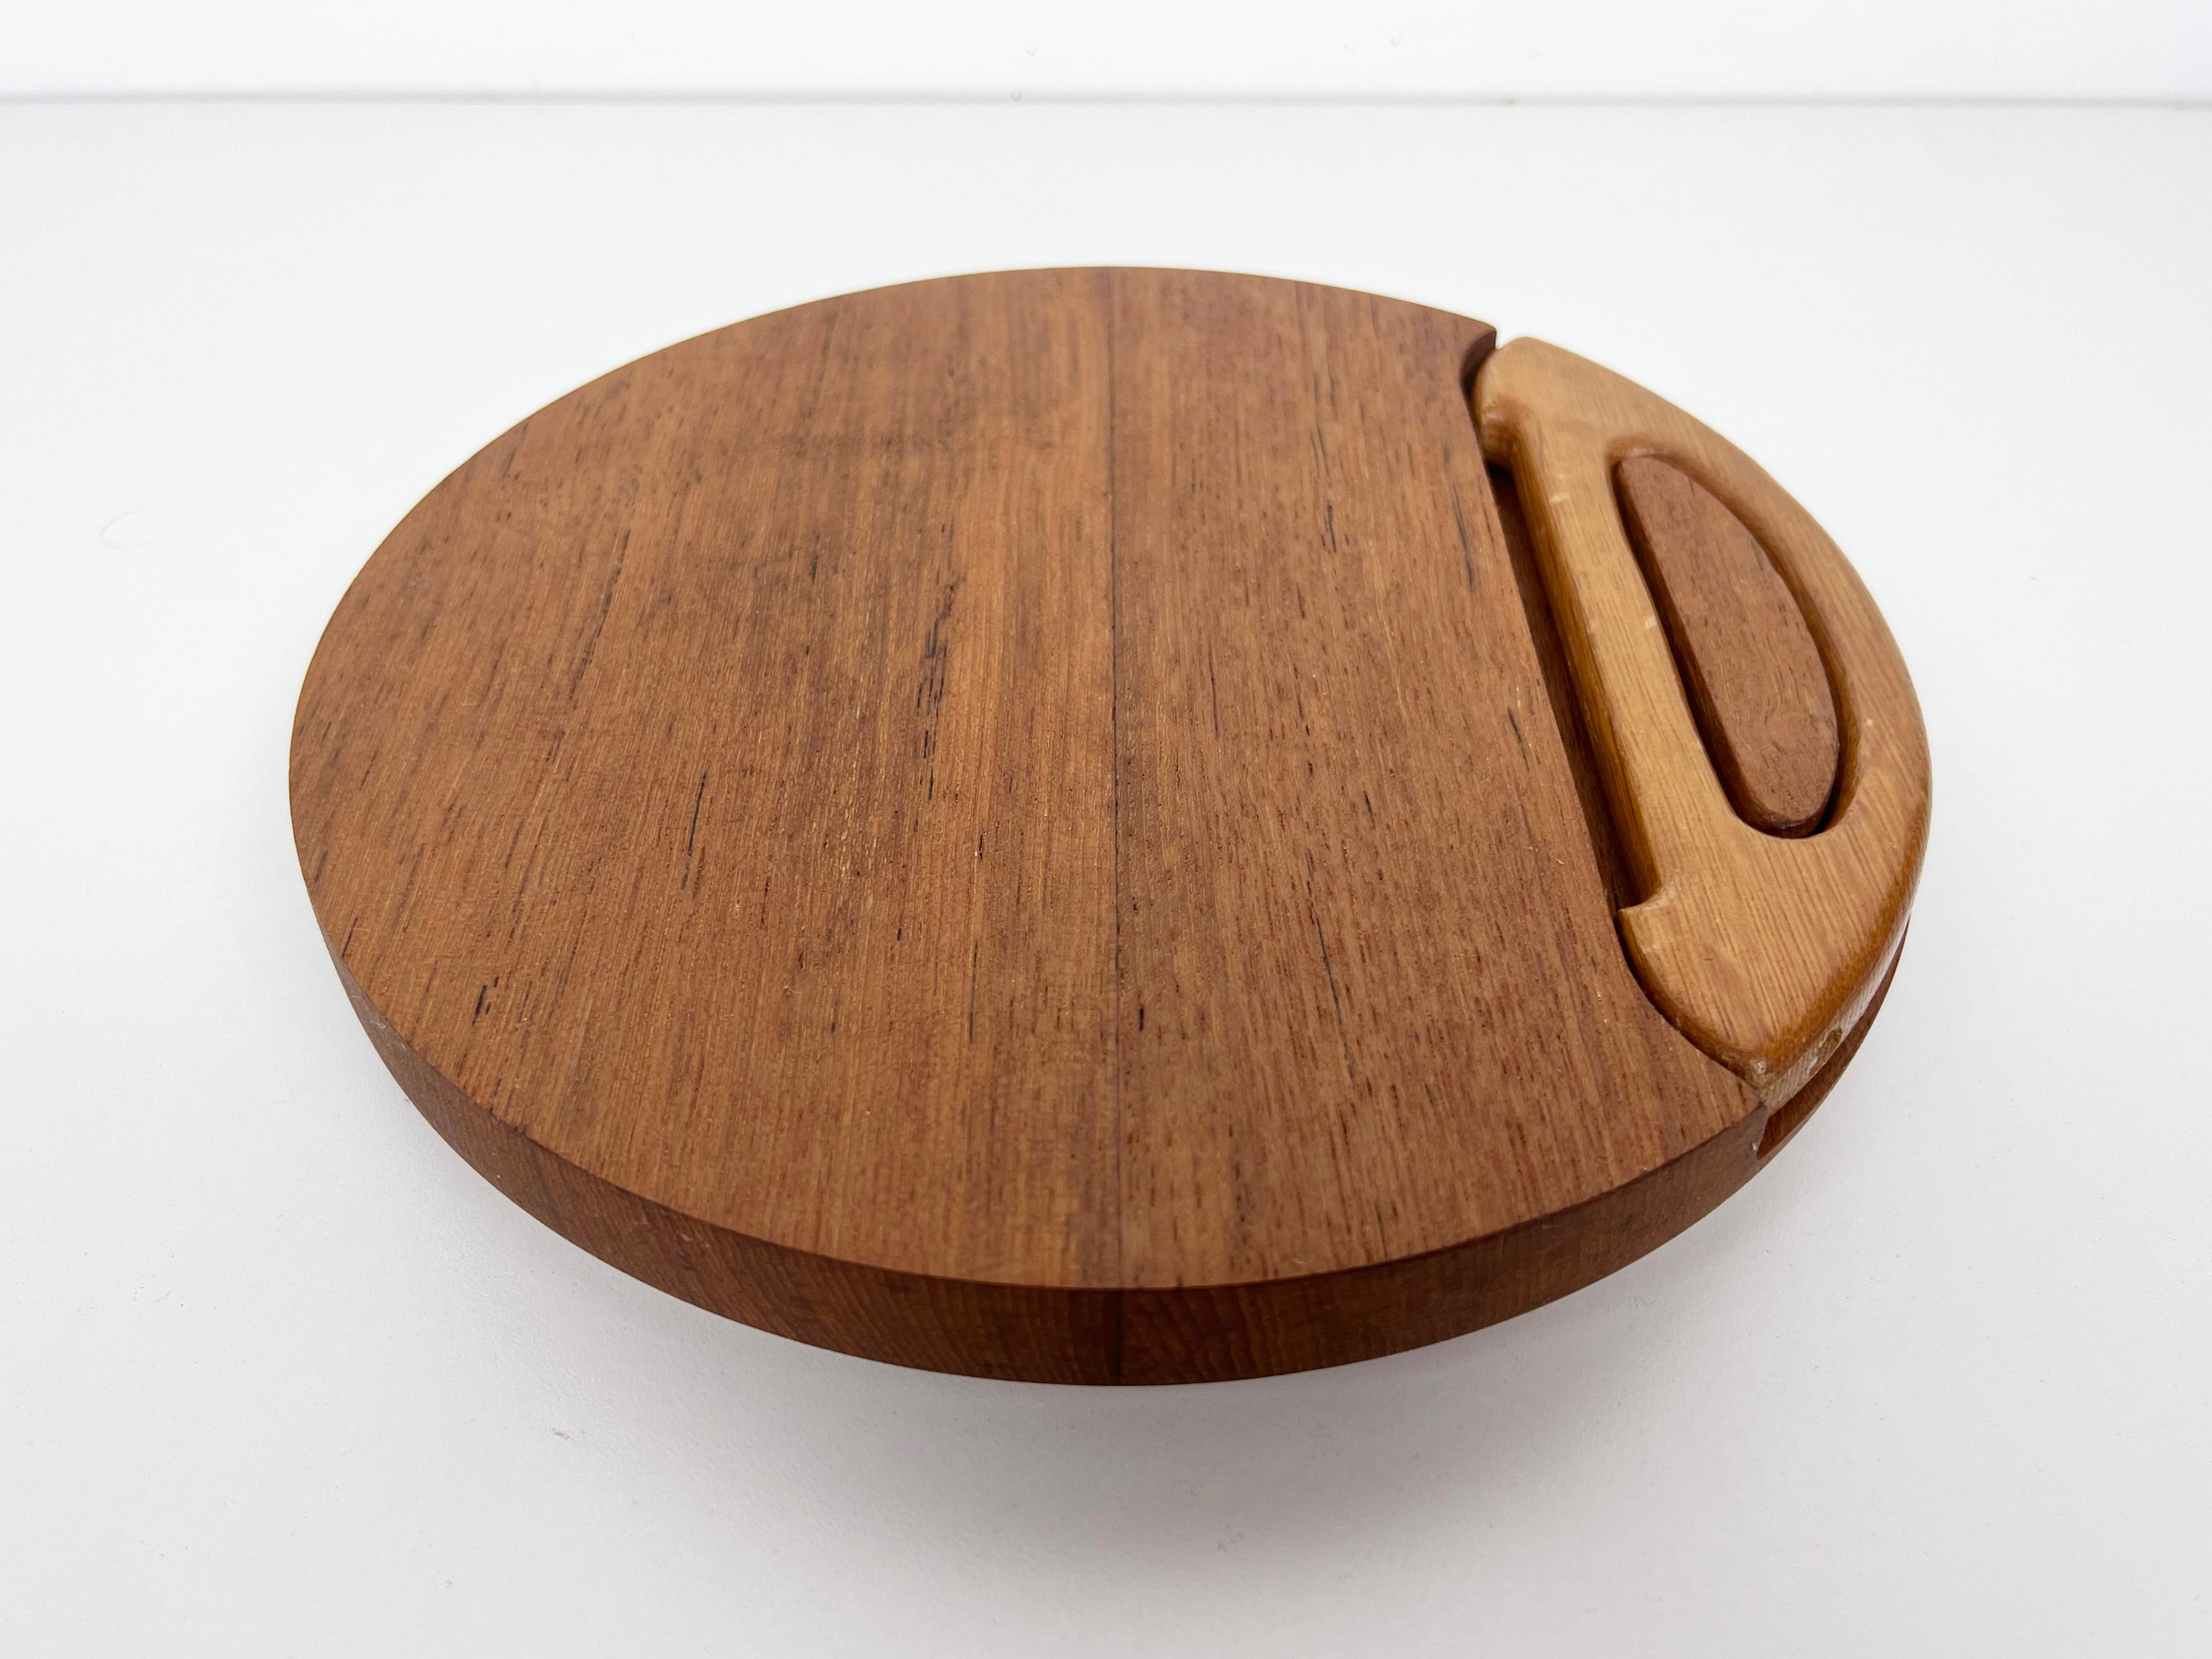 Vintage cheese board crafted from solid teak with built-in wire cheese knife. Features the Dansk four ducks logo on bottom. 

Designer: Jens Quistgaard

Manufacturer: Dansk

Dimensions: 1.3